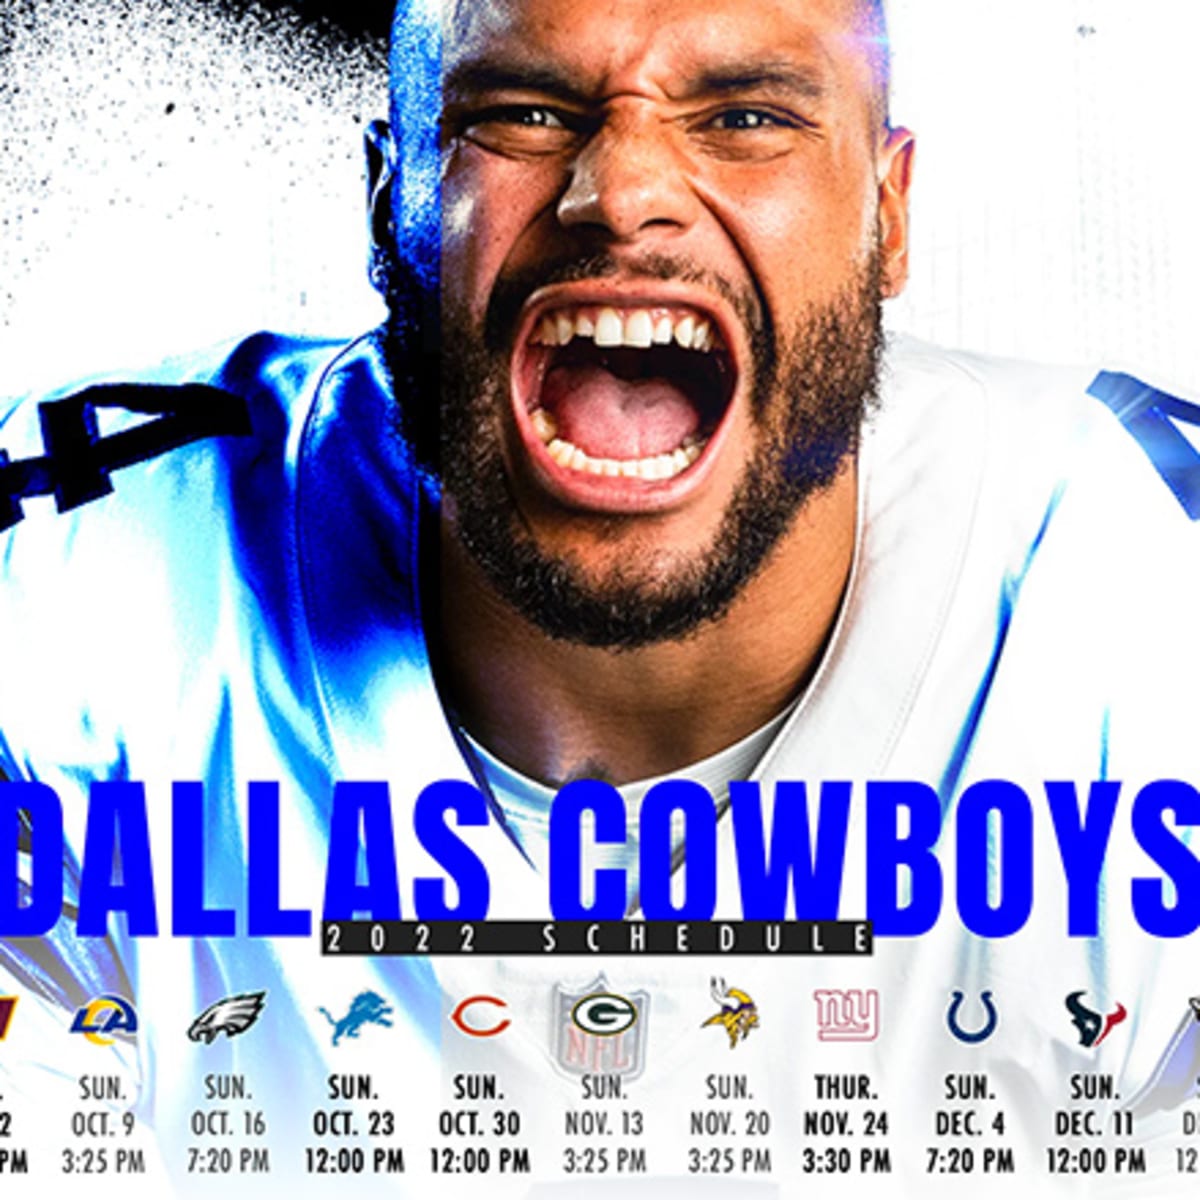 what time does the dallas cowboy game start tomorrow